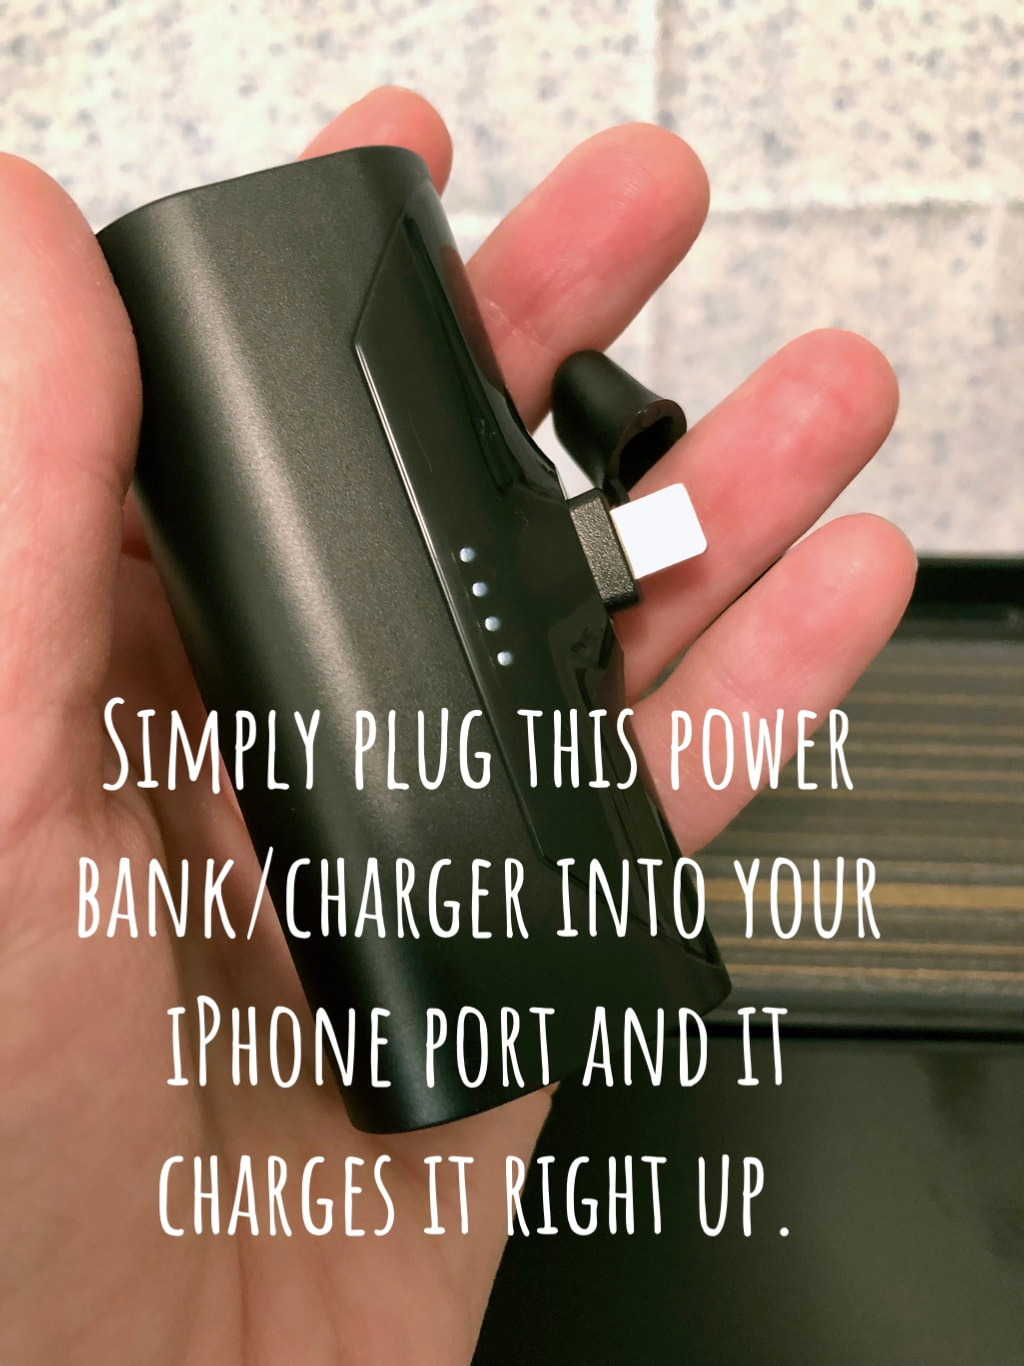 Portable power bank charger for iPhone. 